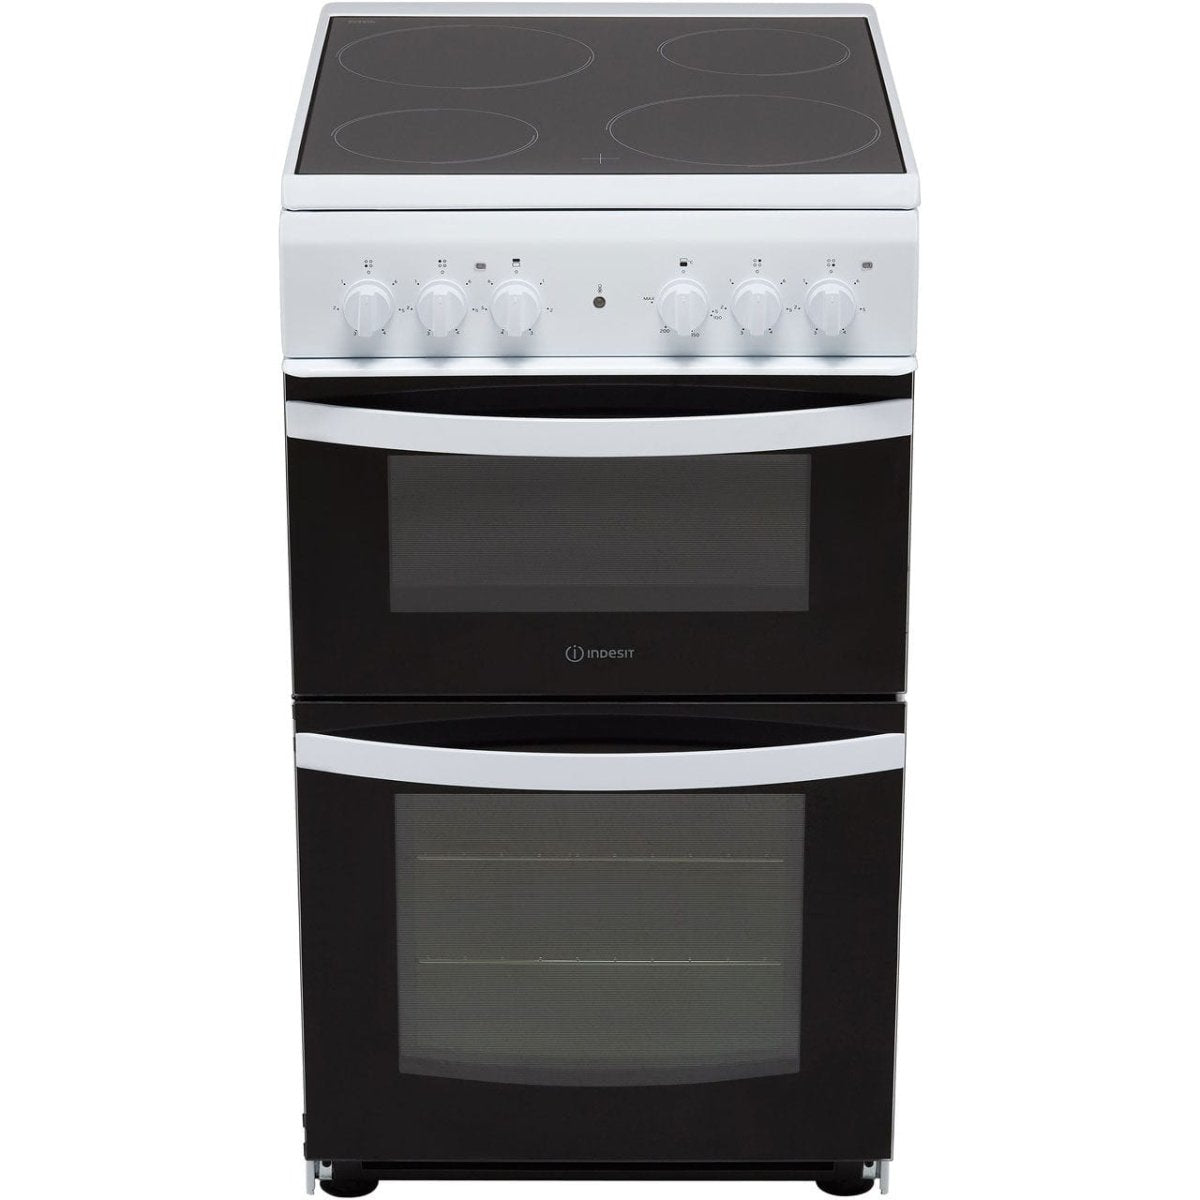 Indesit Cloe ID5V92KMW Twin Cavity Electric Cooker with Ceramic Hob - White - A Rated - Atlantic Electrics